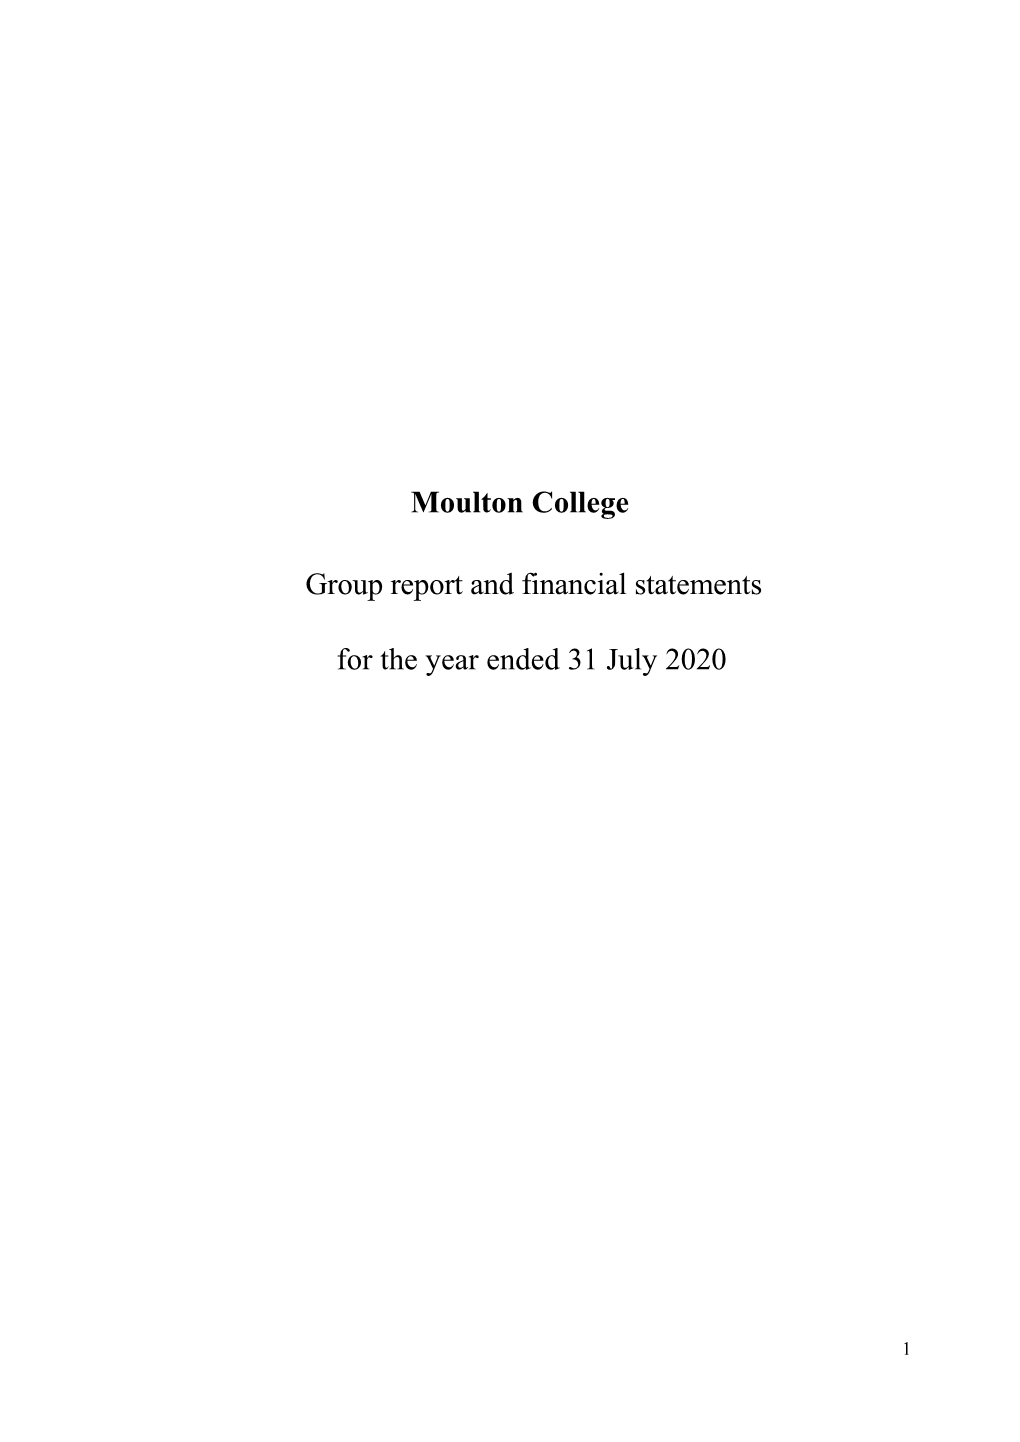 Moulton College Group Report and Financial Statements for the Year